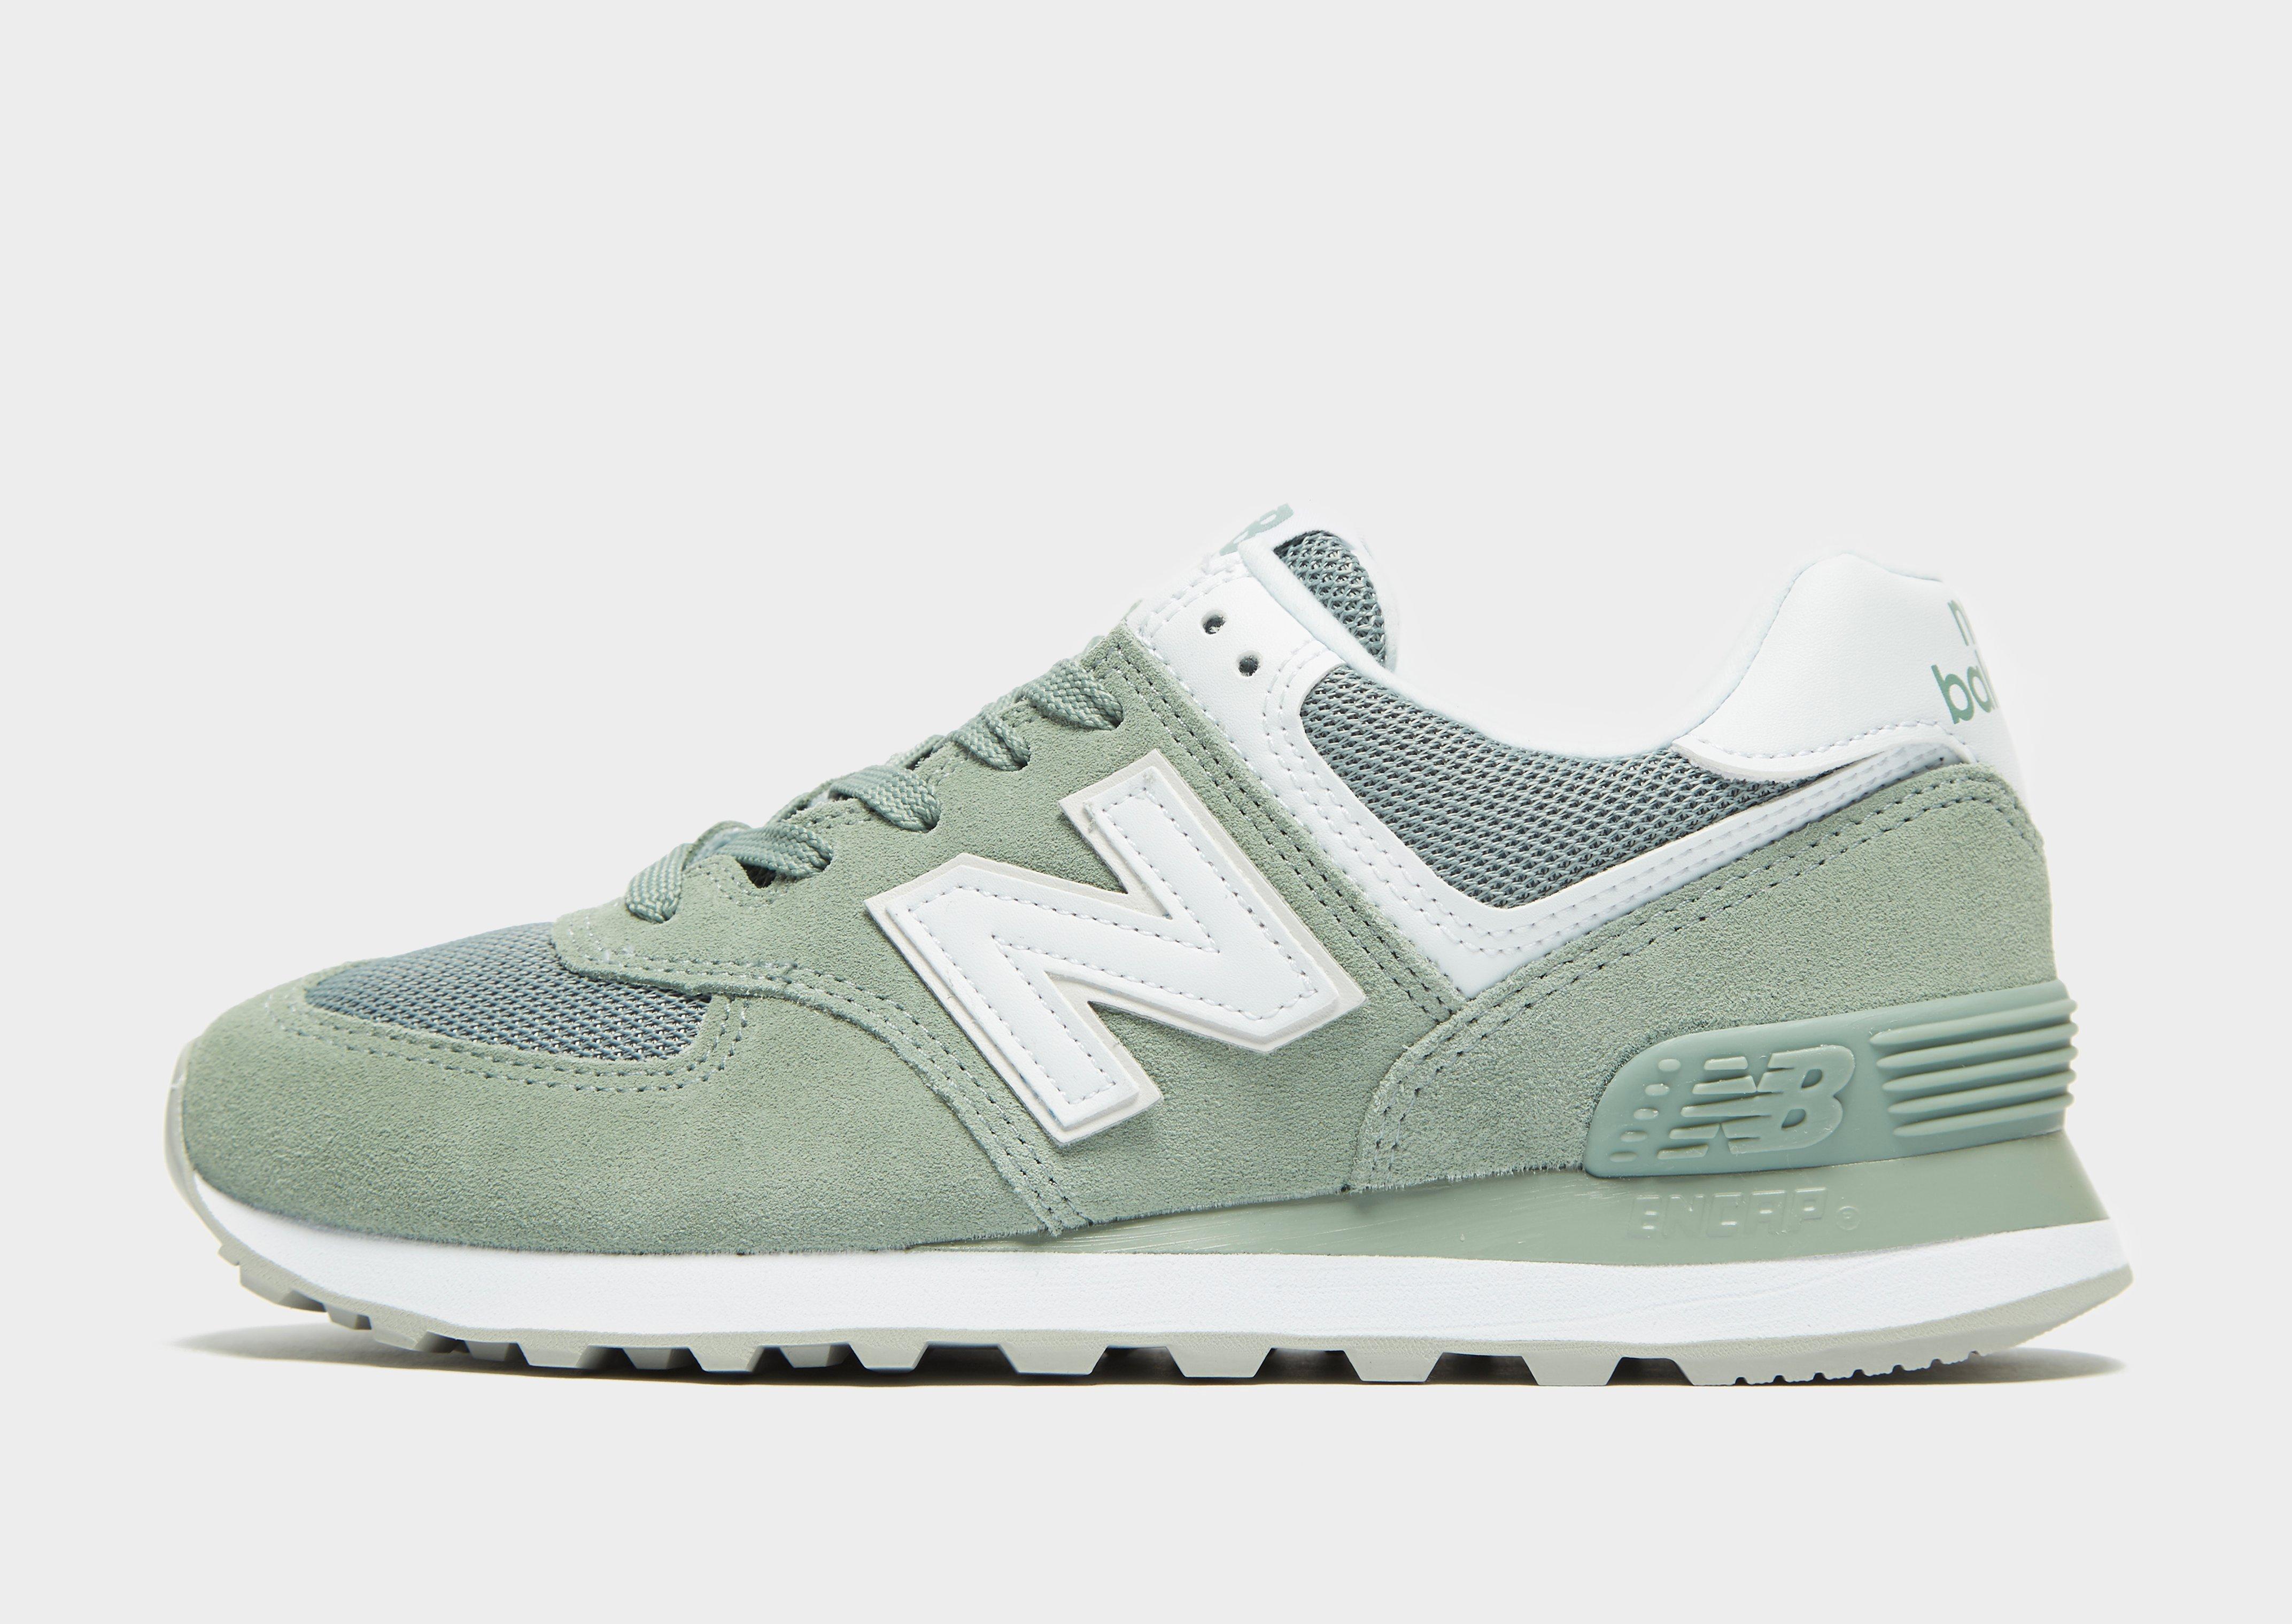 new balance sneakers 574 dames